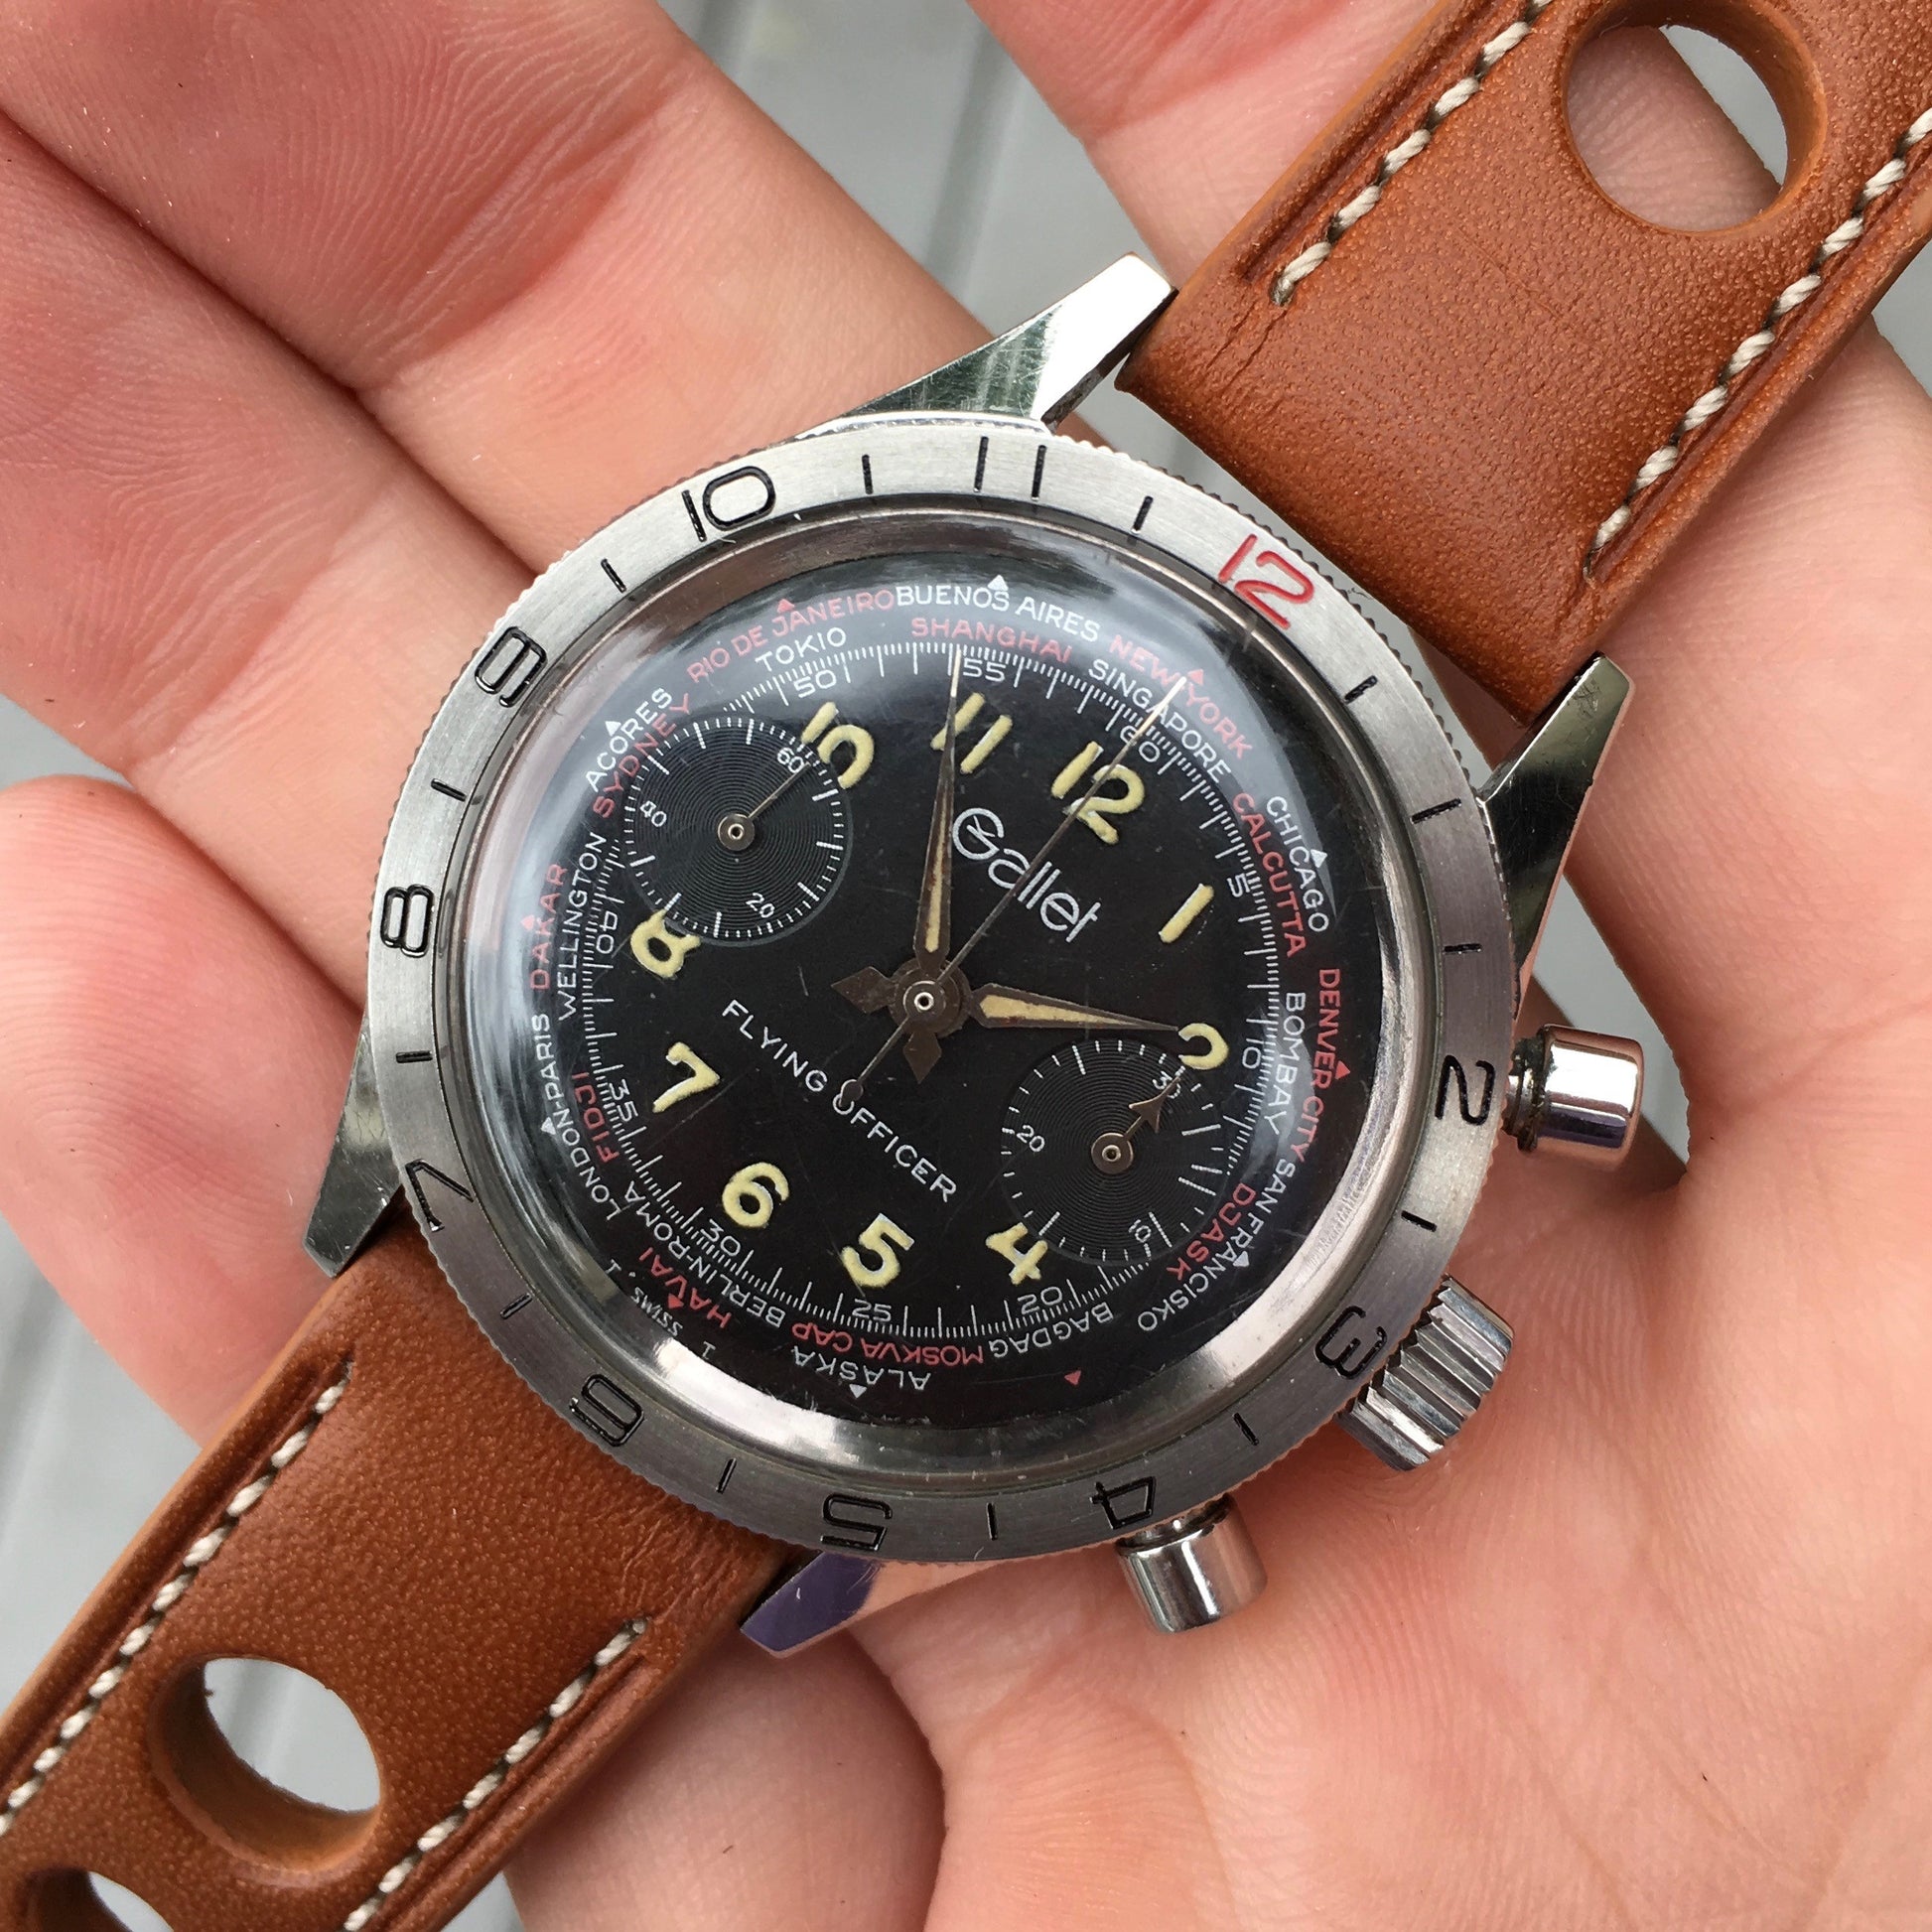 Vintage Gallet Flying Officer Chronograph Landeron Caliber 149 Steel Wristwatch Circa 1970's 3rd Gen. - Hashtag Watch Company